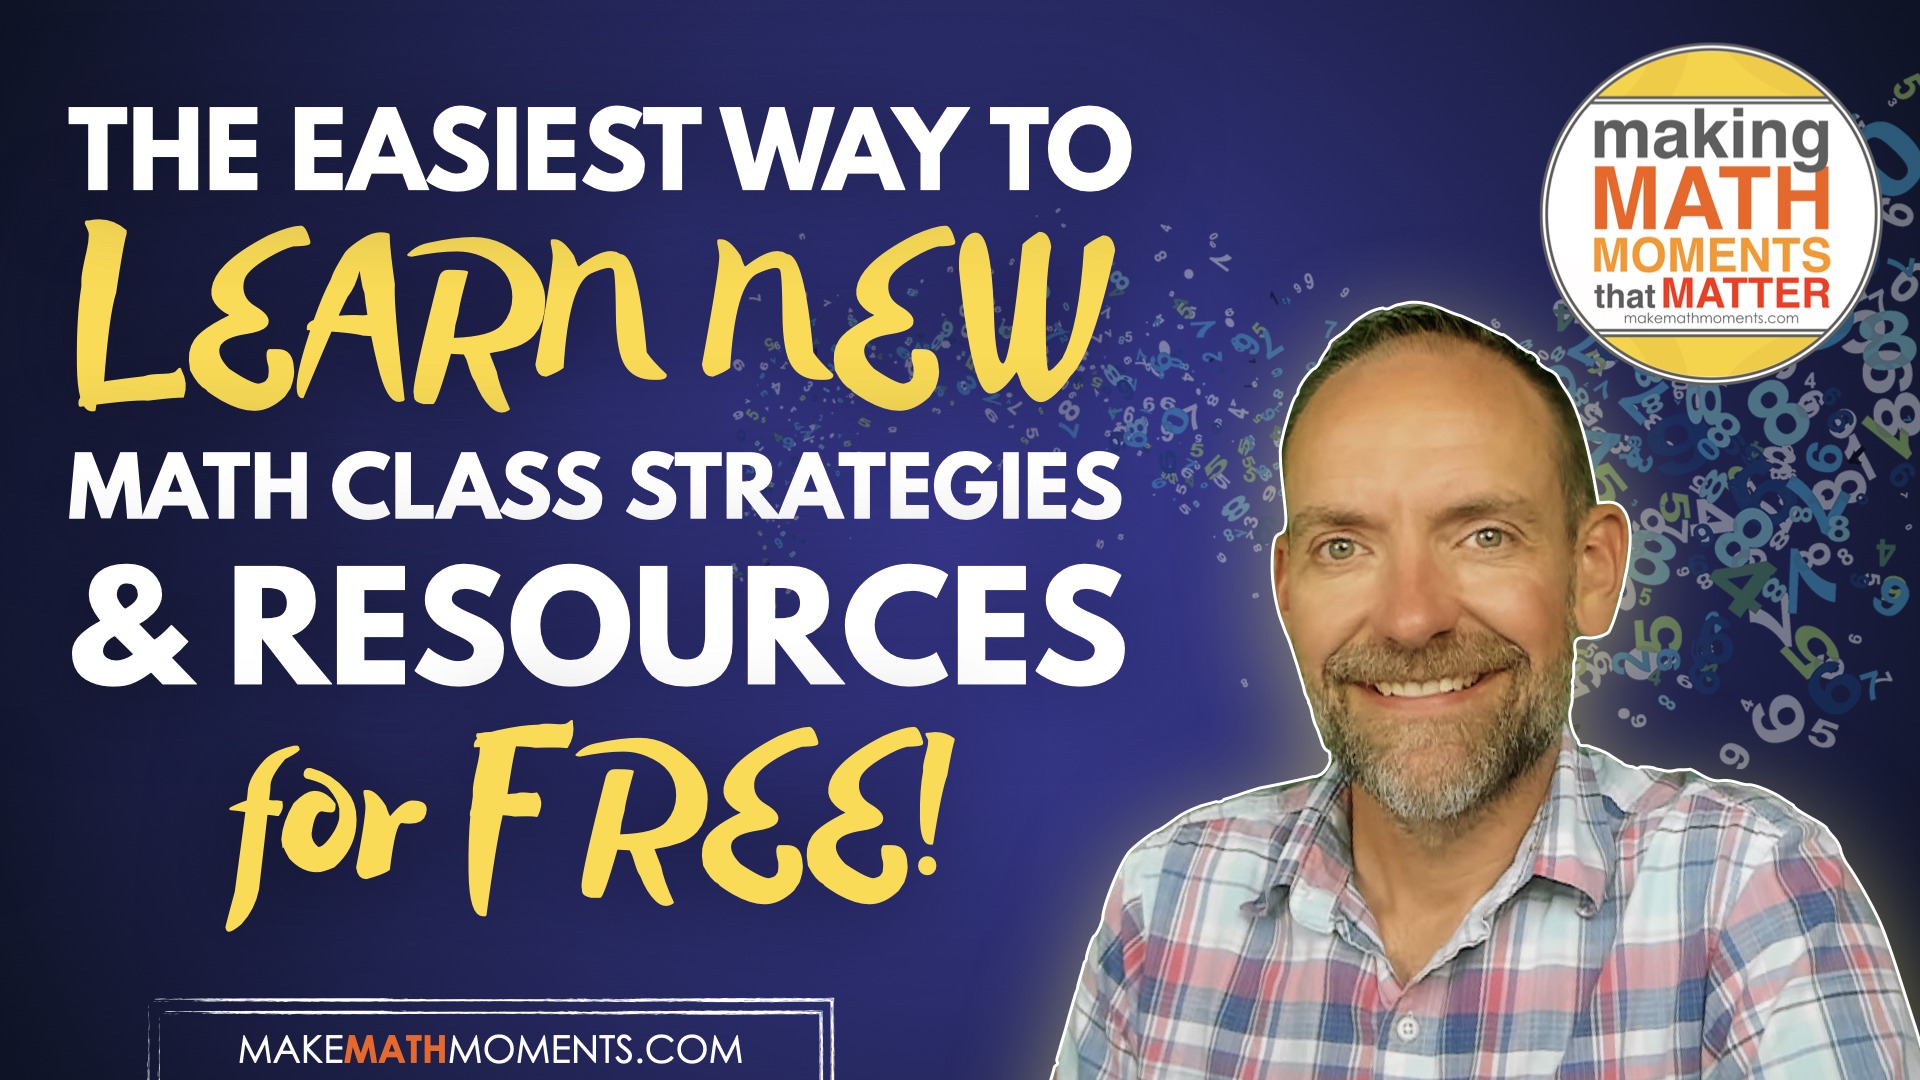 The Easiest Way to Learn New Math Class Strategies & Resources for FREE!